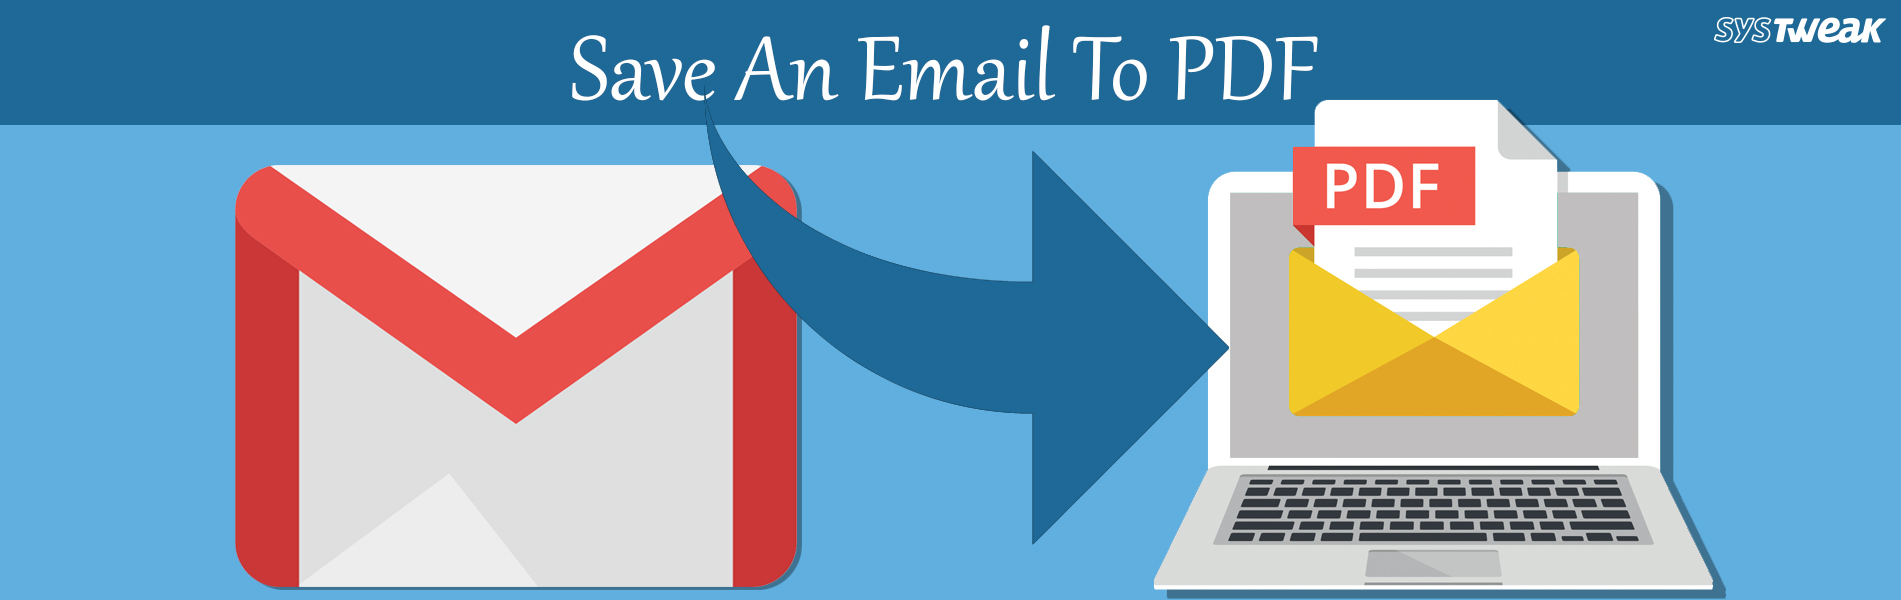 How To Convert An Email To PDF